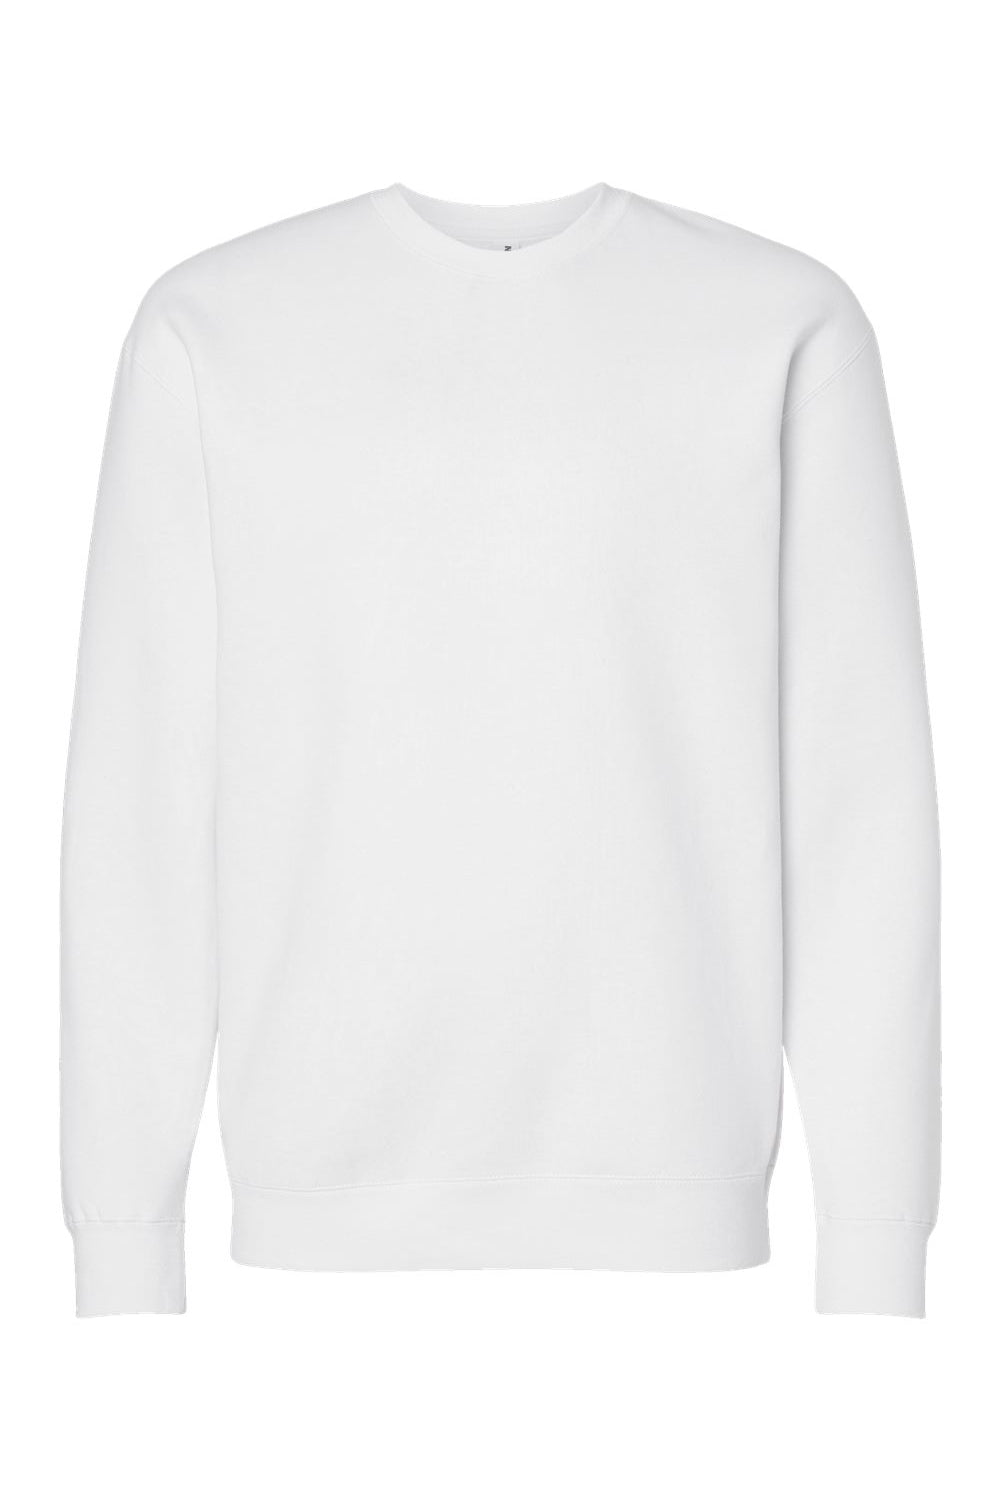 Independent Trading Co. IND3000 Mens Crewneck Sweatshirt White Flat Front